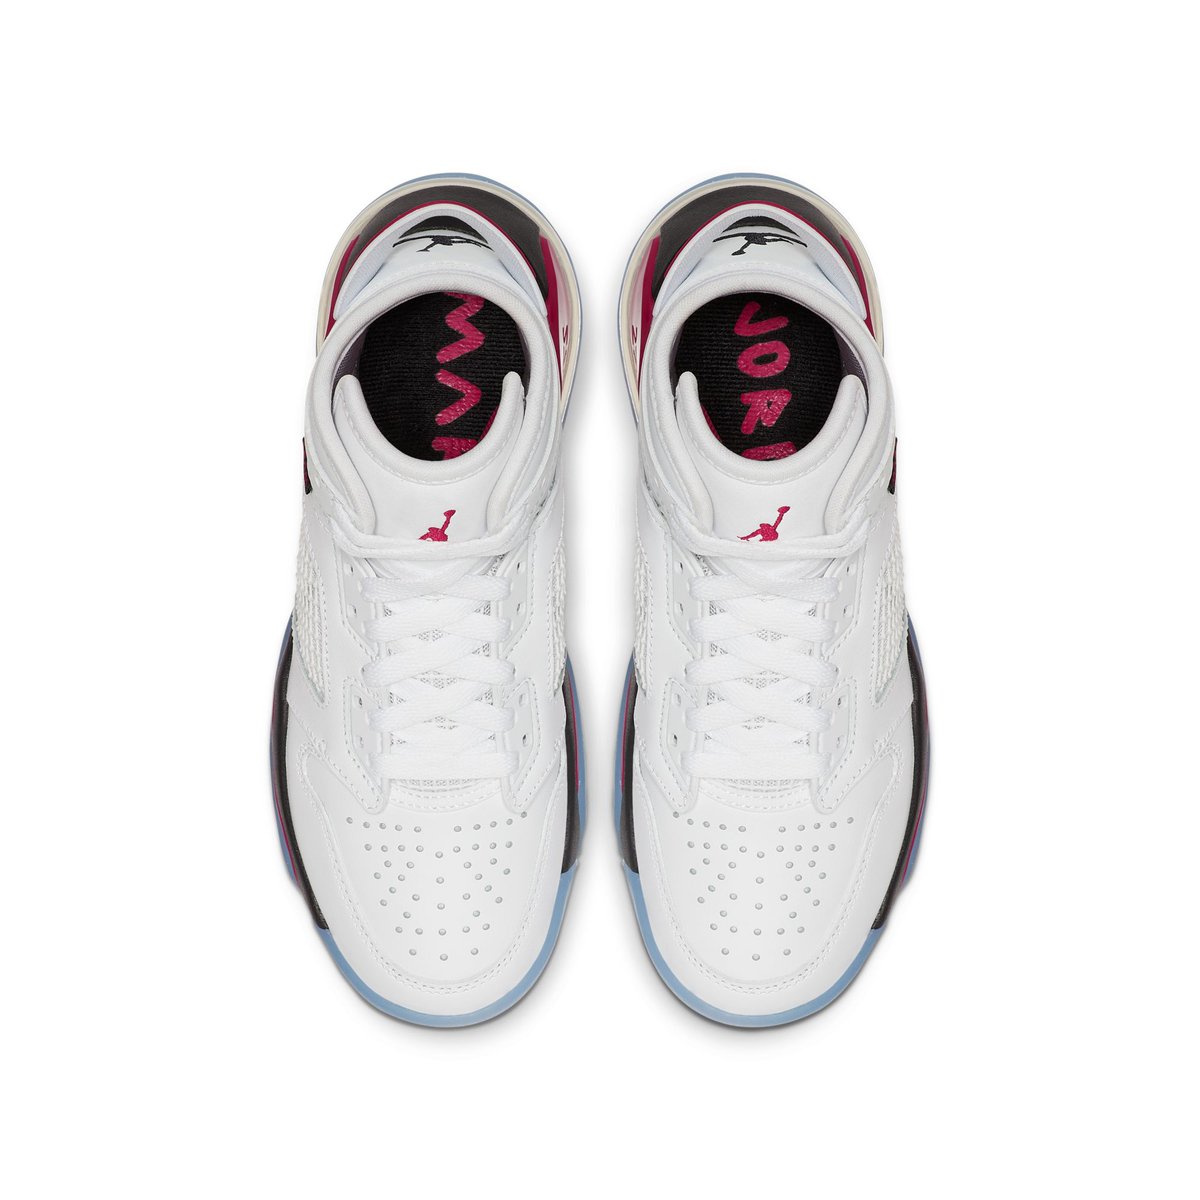 A 'White/Black/Red' Colorway Has Been Spotted on the Jordan Mars 270